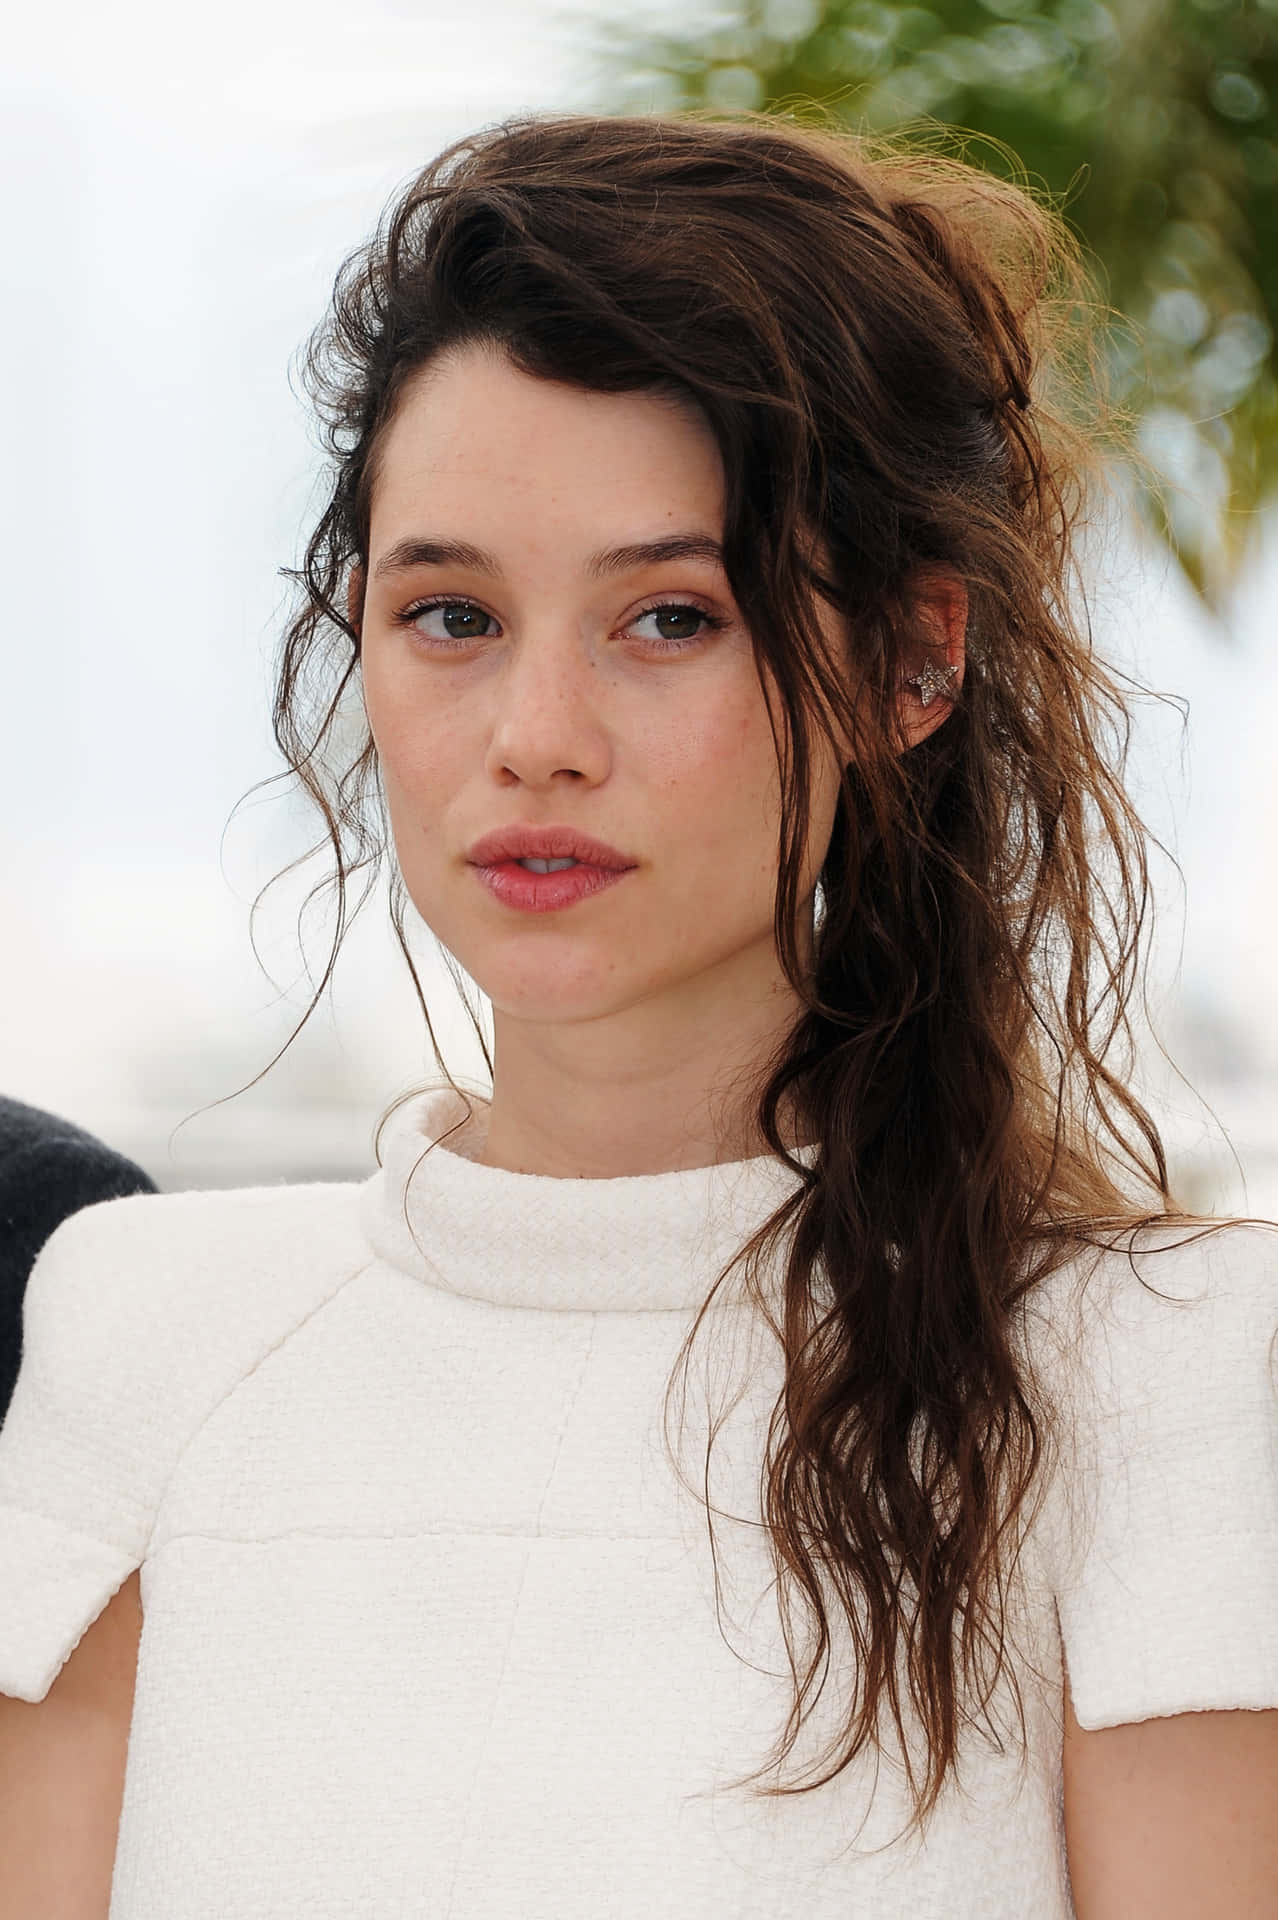 Astrid Berges-Frisbey posing for a photoshoot Wallpaper